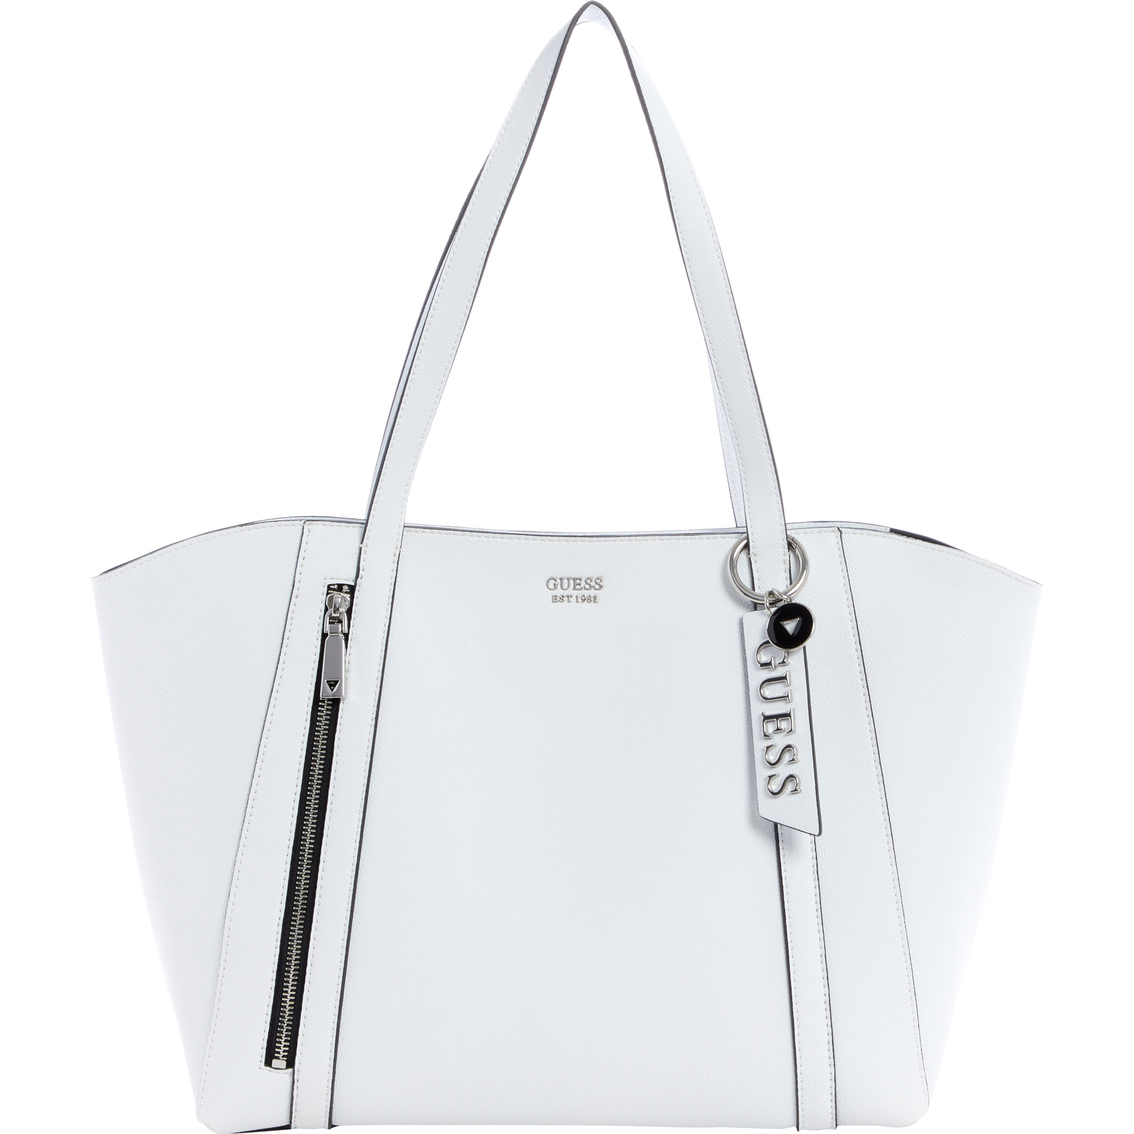 Guess Naya Tote, Totes & Shoppers, Clothing & Accessories